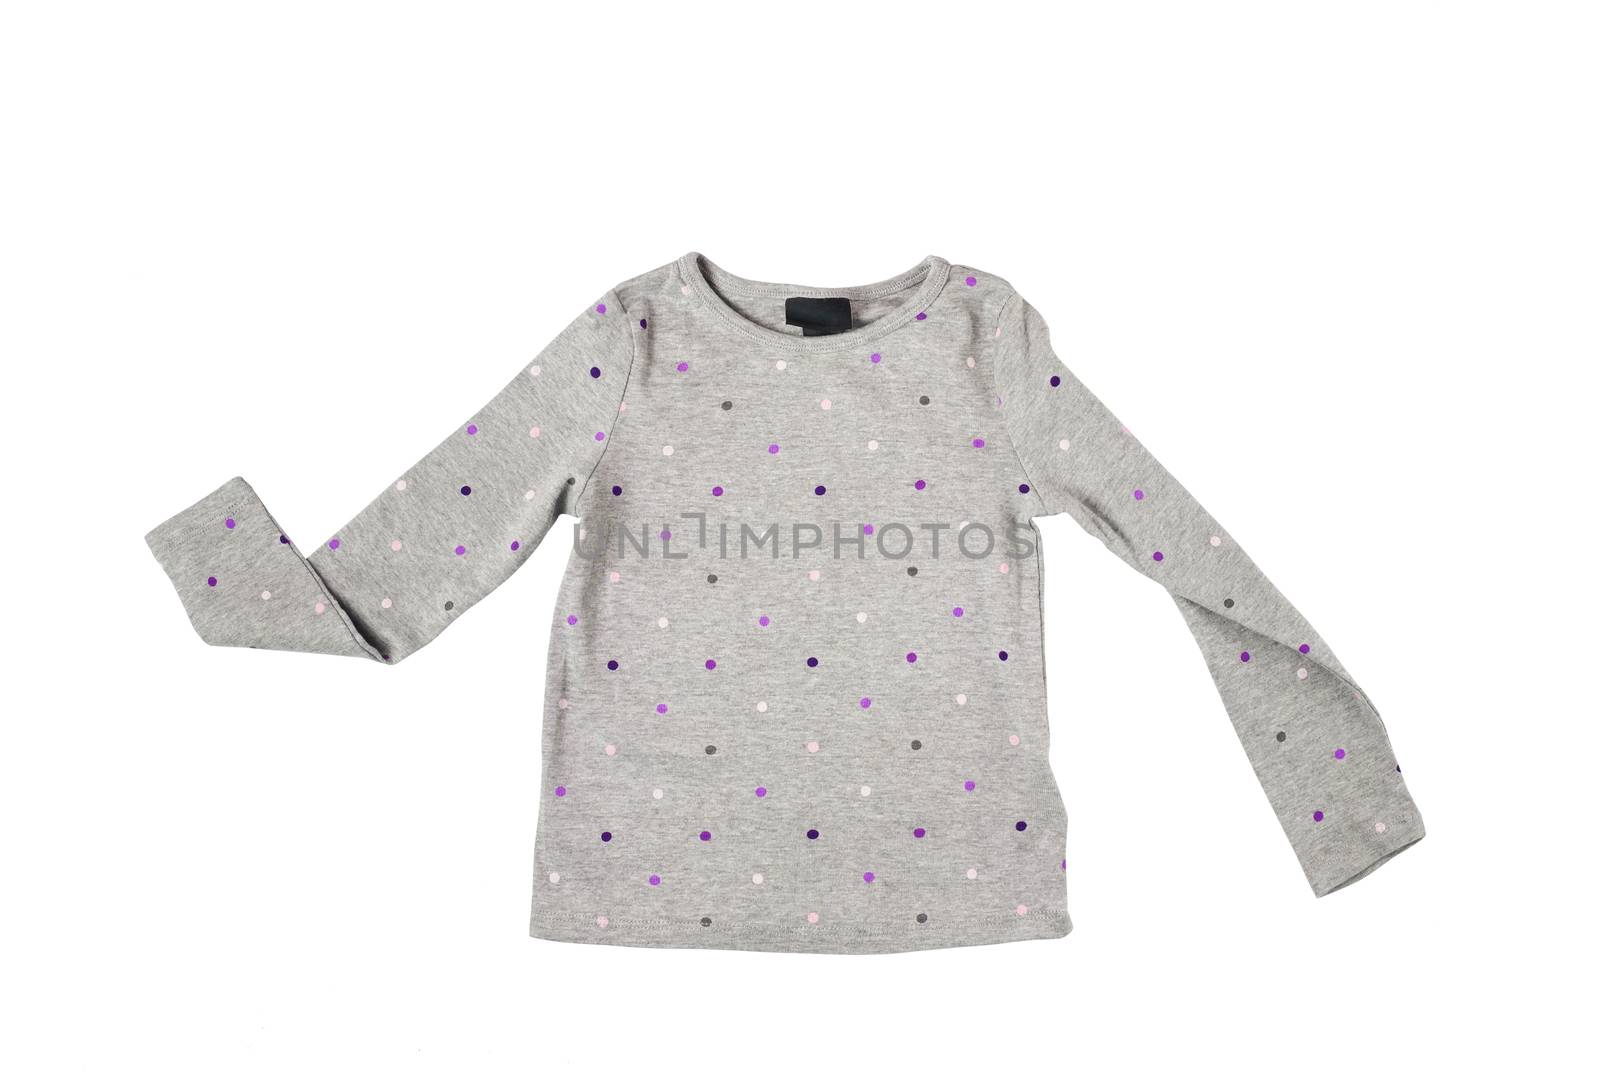 the little girl's gray tshirt with long sleeves in pink, purple polka dots print, cotton blouse for spring and summer wardrobe isolated on white background